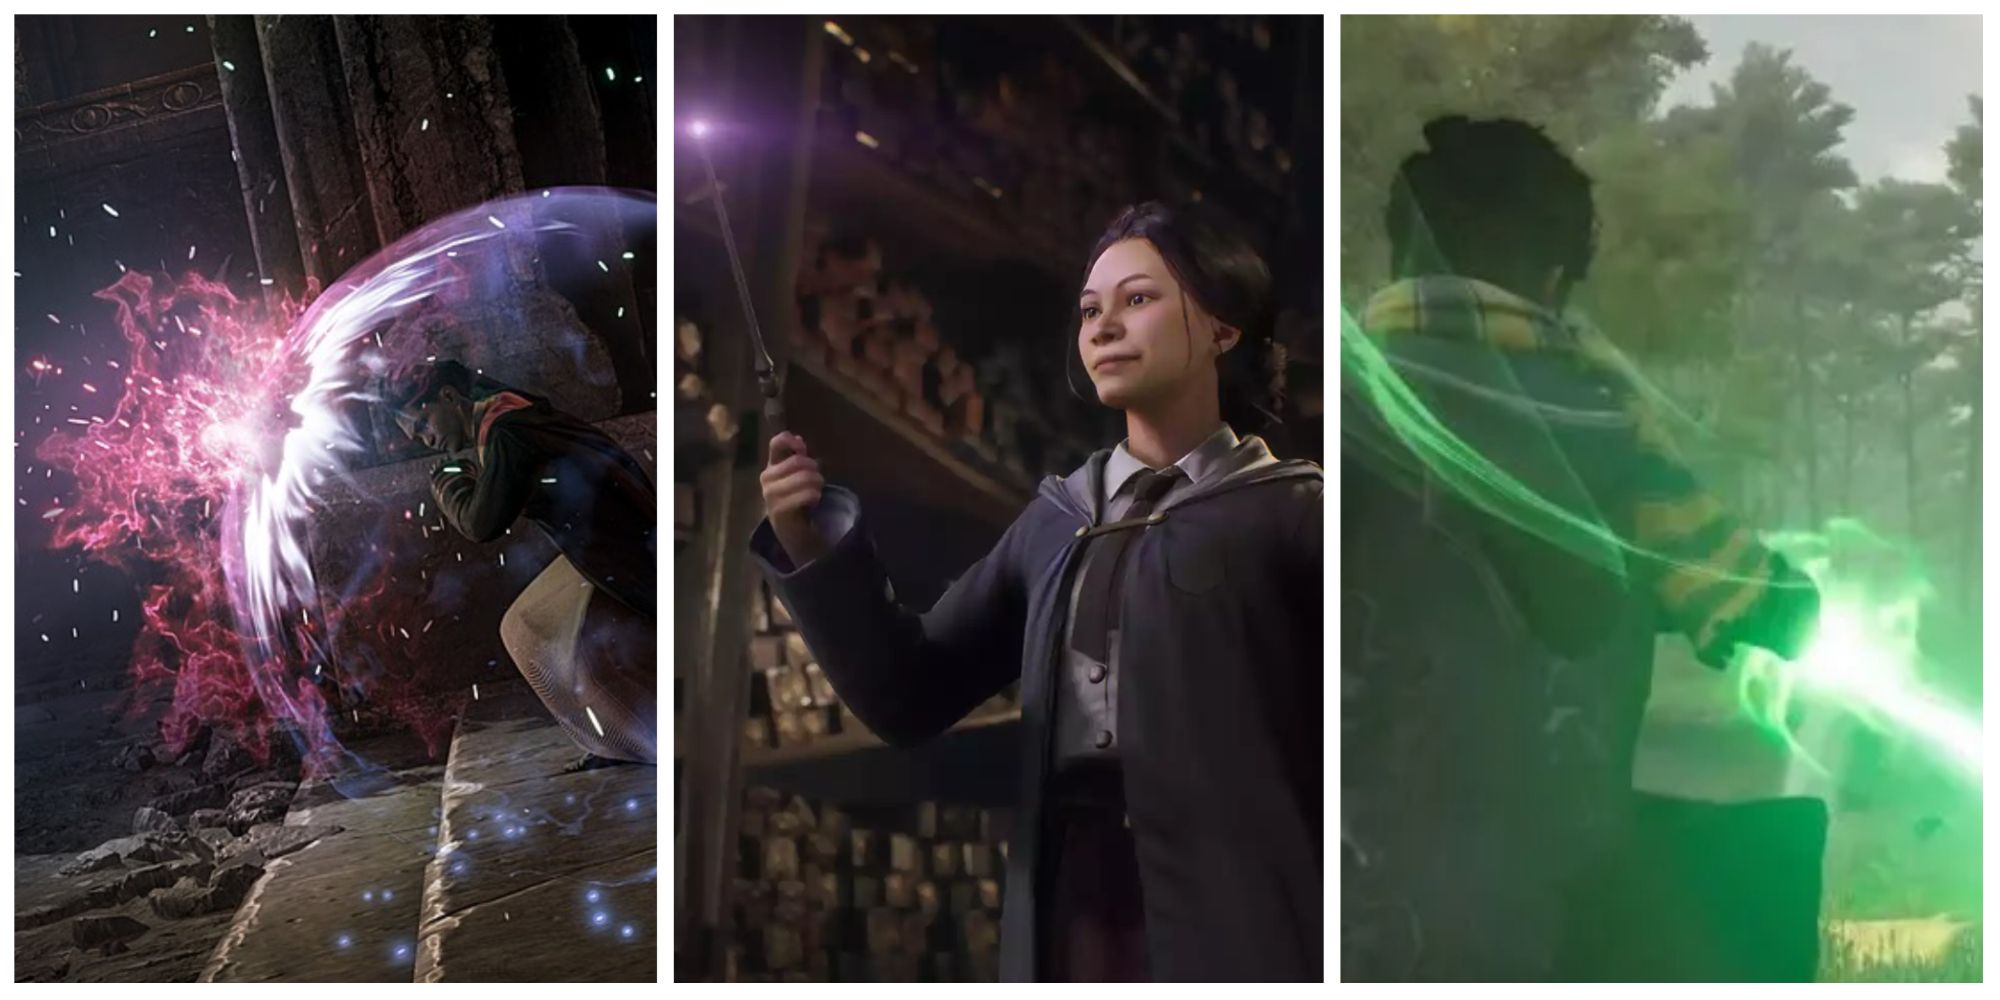 spell casting images in hogwarts legacy